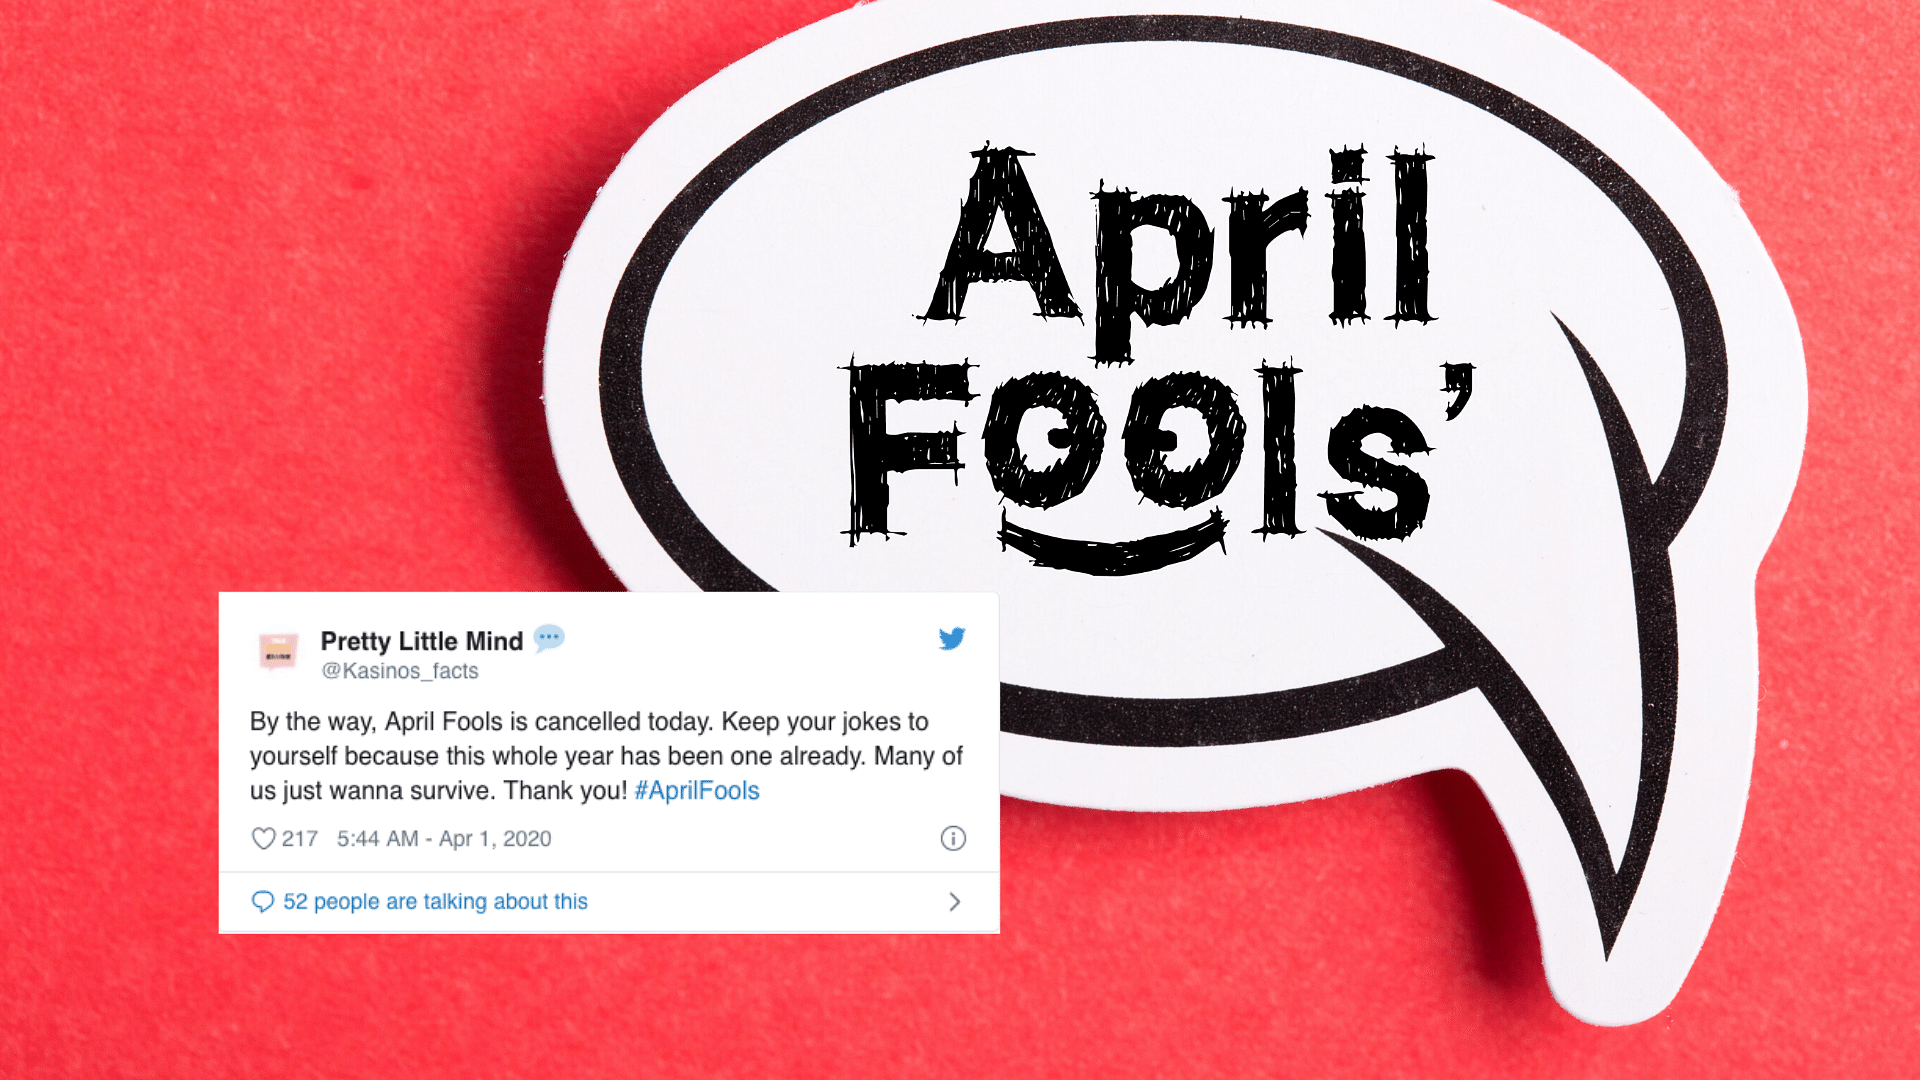 Pranks and jokes have taken a backseat this year, on April Fools Day.